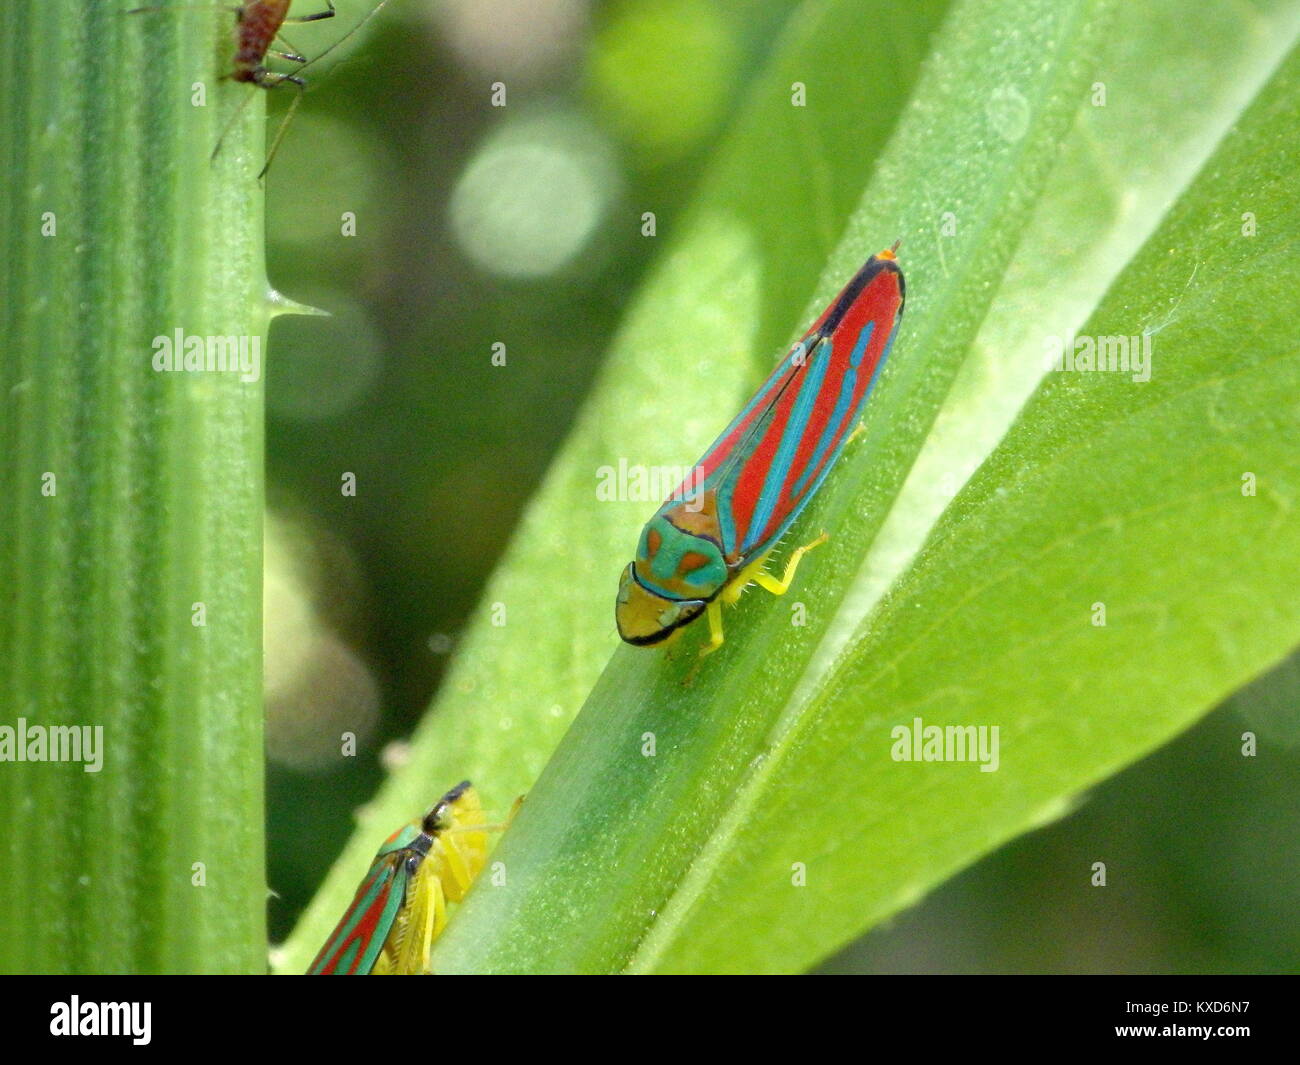 Red Banded Leafhopper Stock Photo